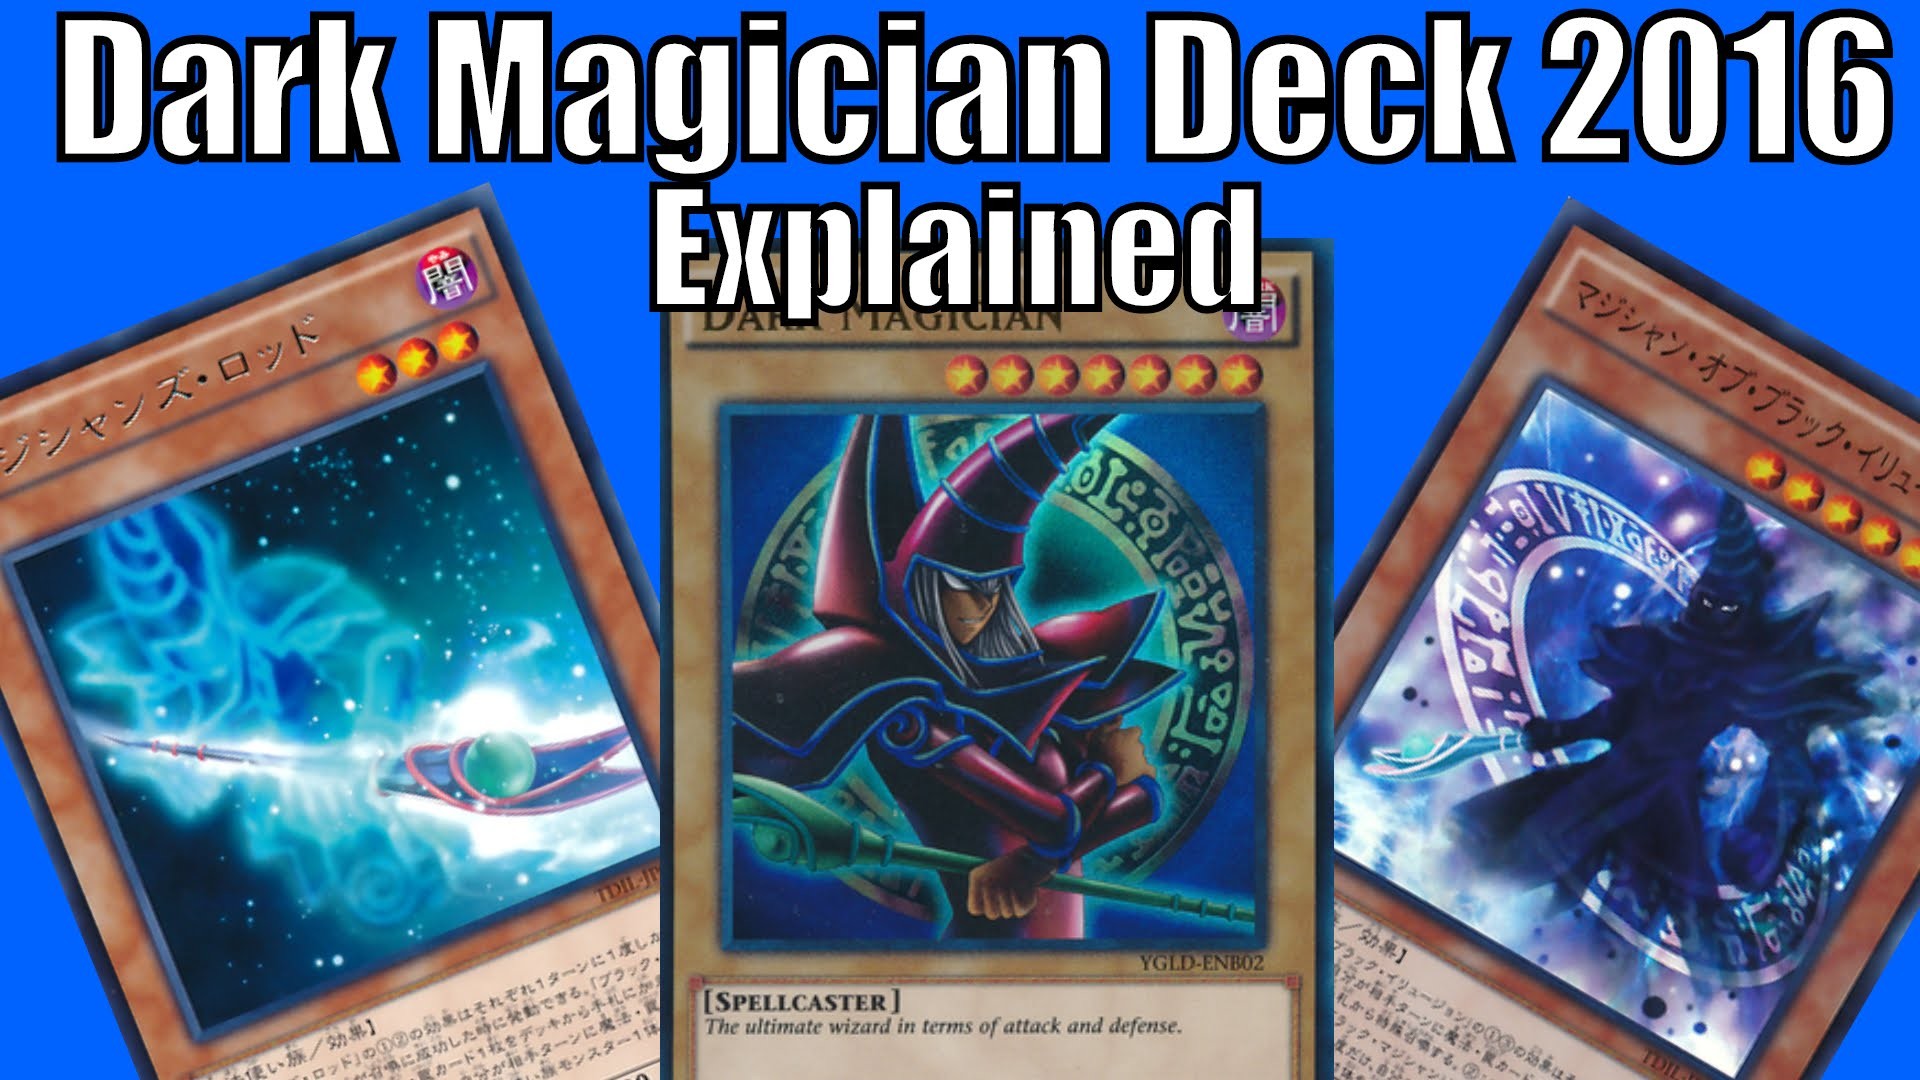 1920x1080 Dark Magician Deck 2016 Explained - The Dark illusion is coming!!! - YouTube